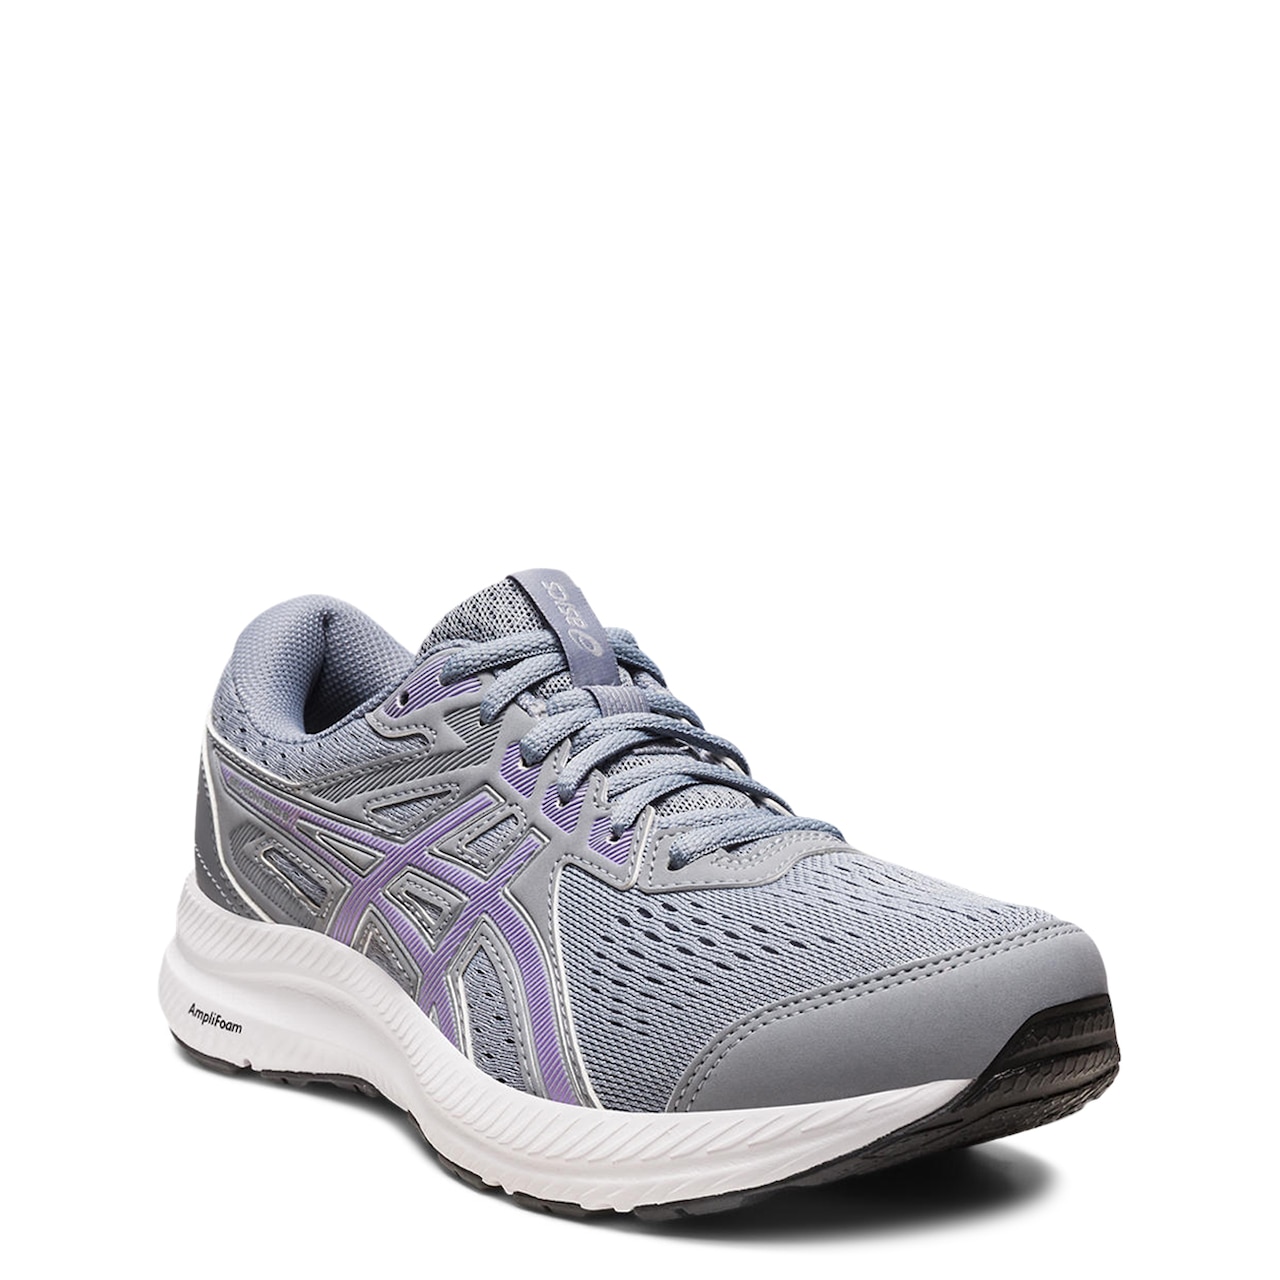 Asics Sneakers & Athletic Shoes: Shop Online & Save